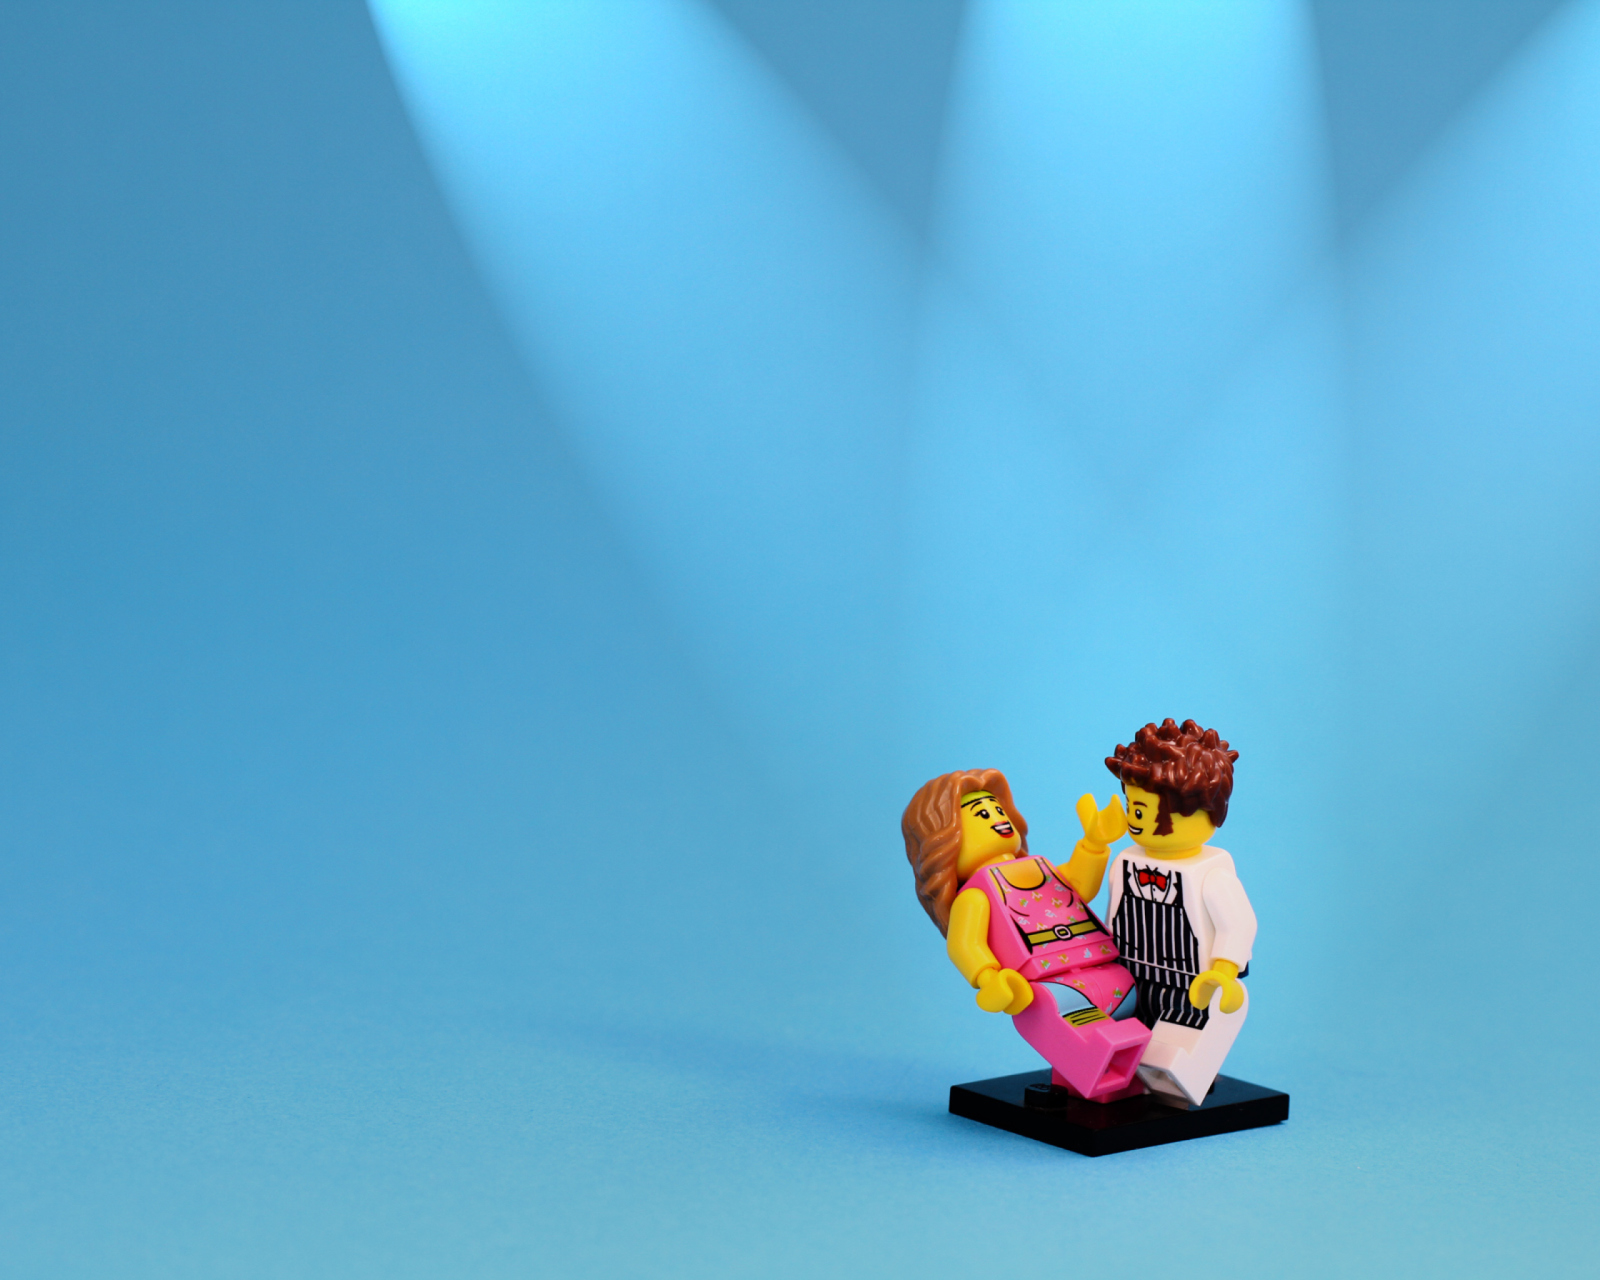 Dance With Me Lego wallpaper 1600x1280